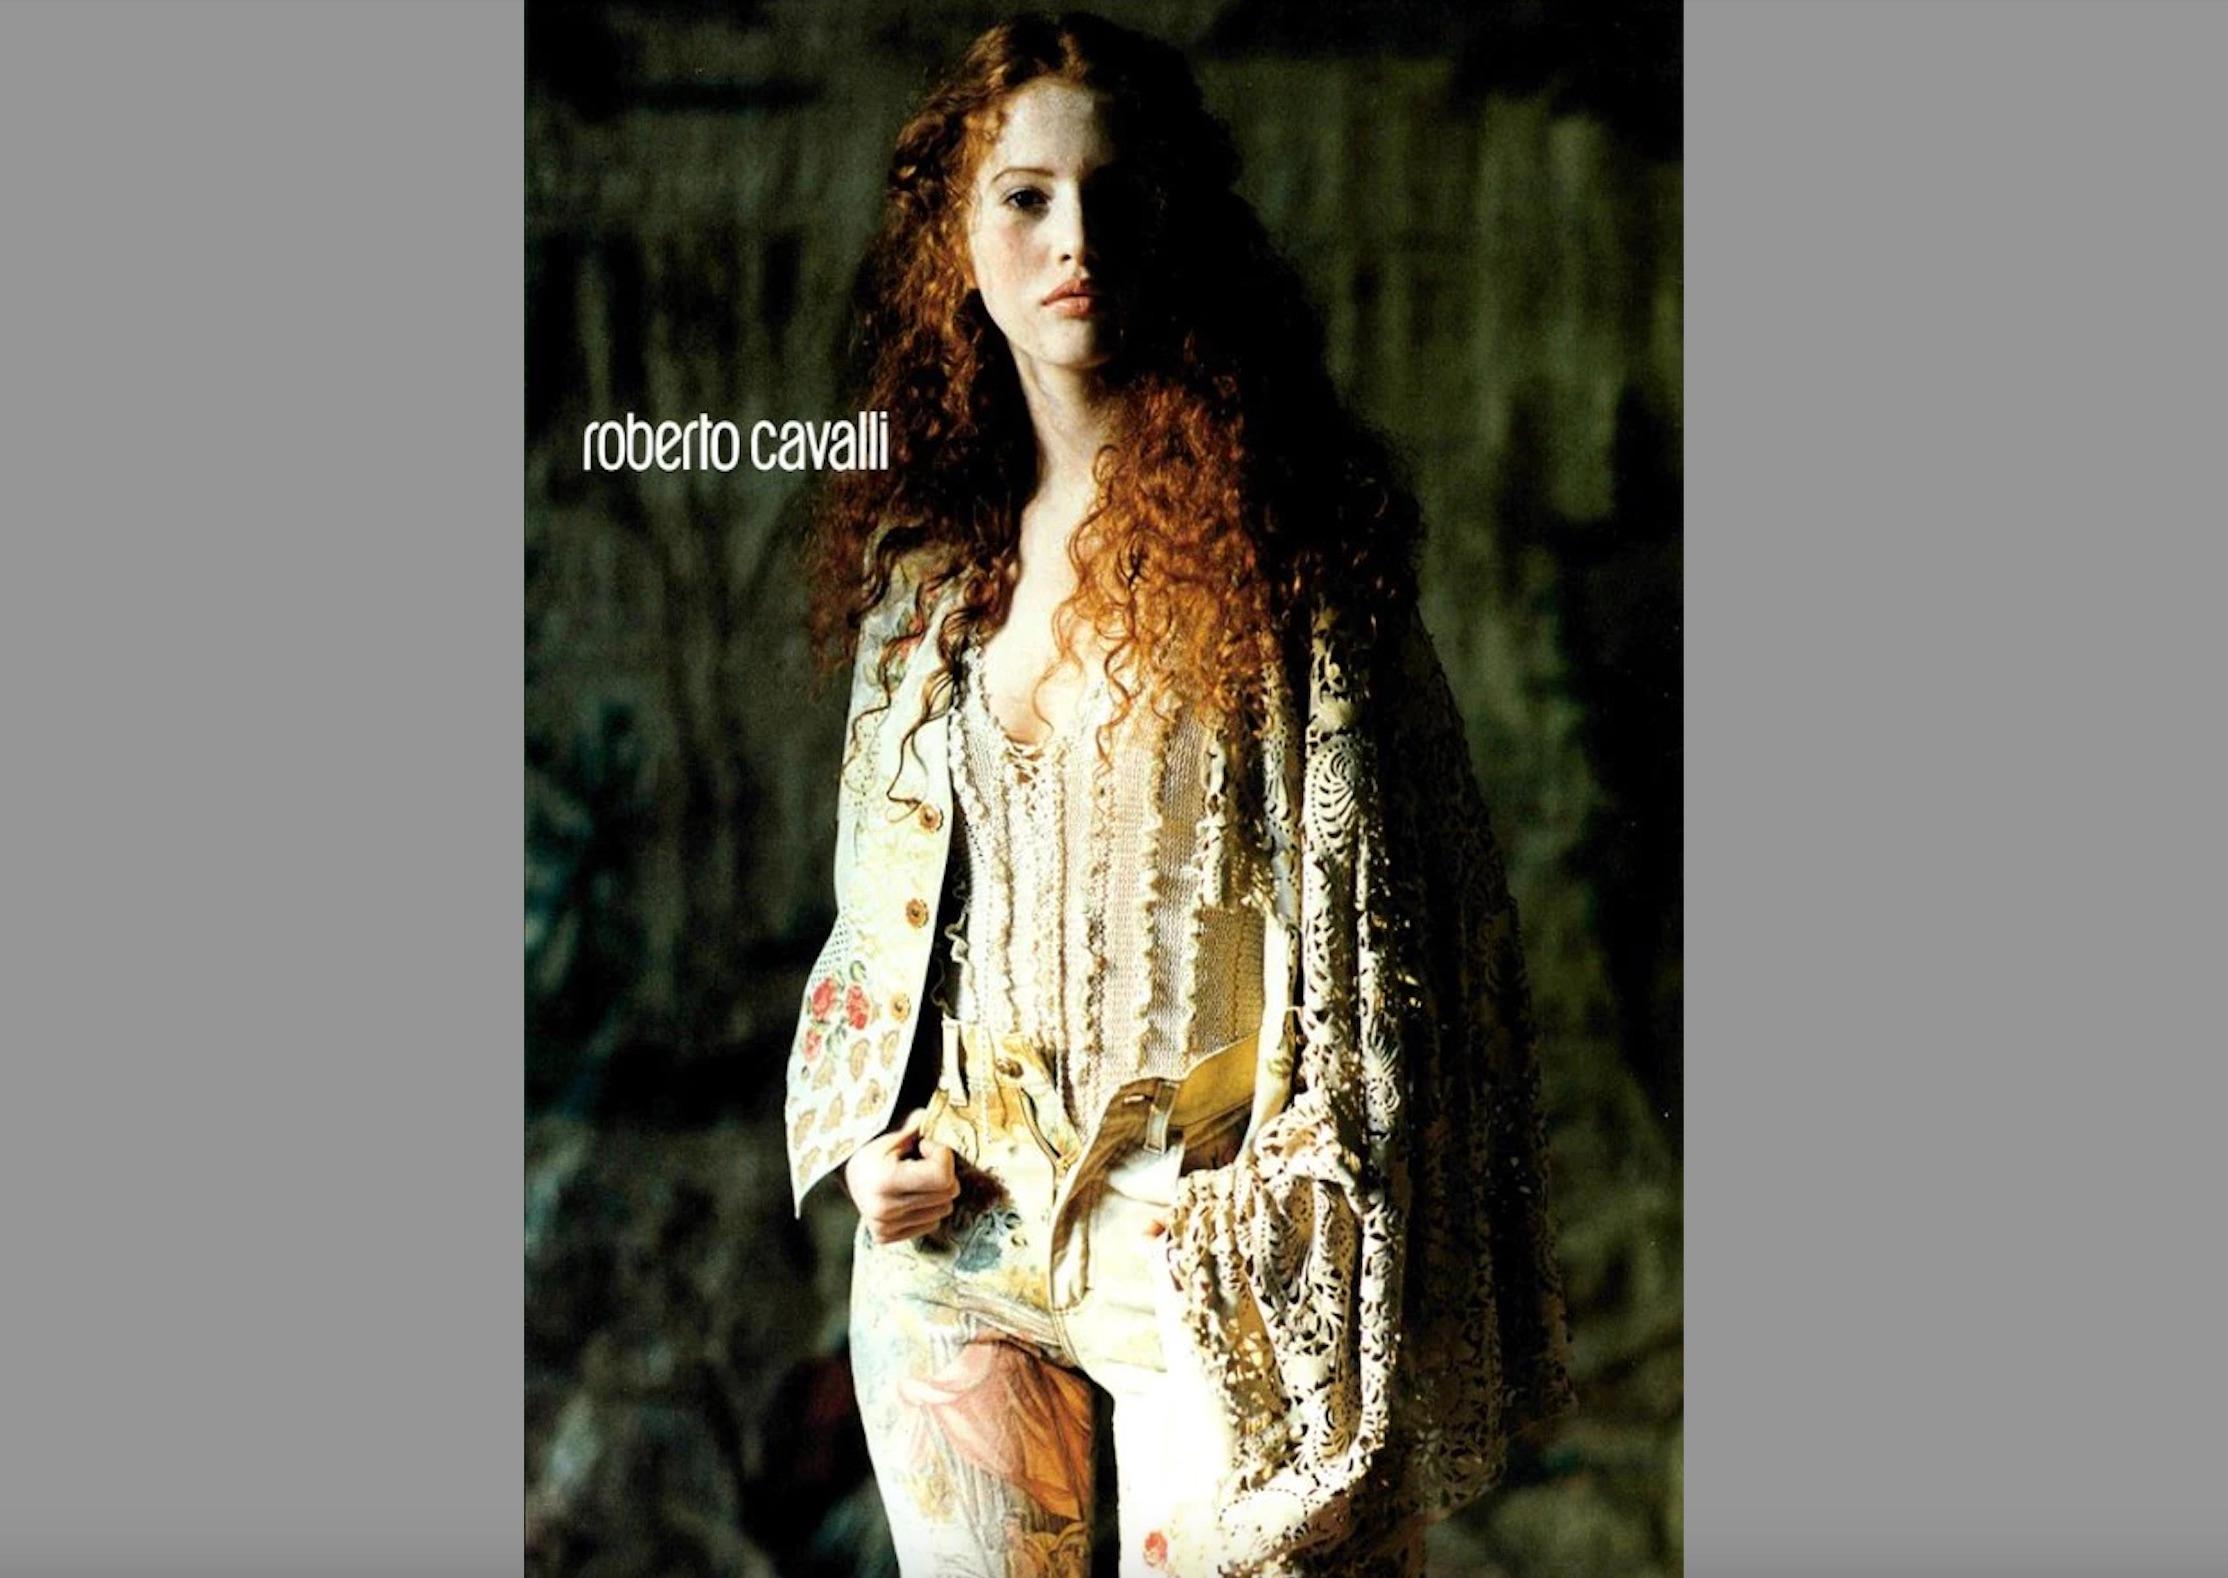 Rare Runway Roberto Cavalli Leather Gilet

S/S 1994

Campaign: Maayan Keret for Roberto Cavalli 

Size: M

Measures: Shoulder 35cm / Length 50cm

Materials: Leather

Conditions: Excellent.